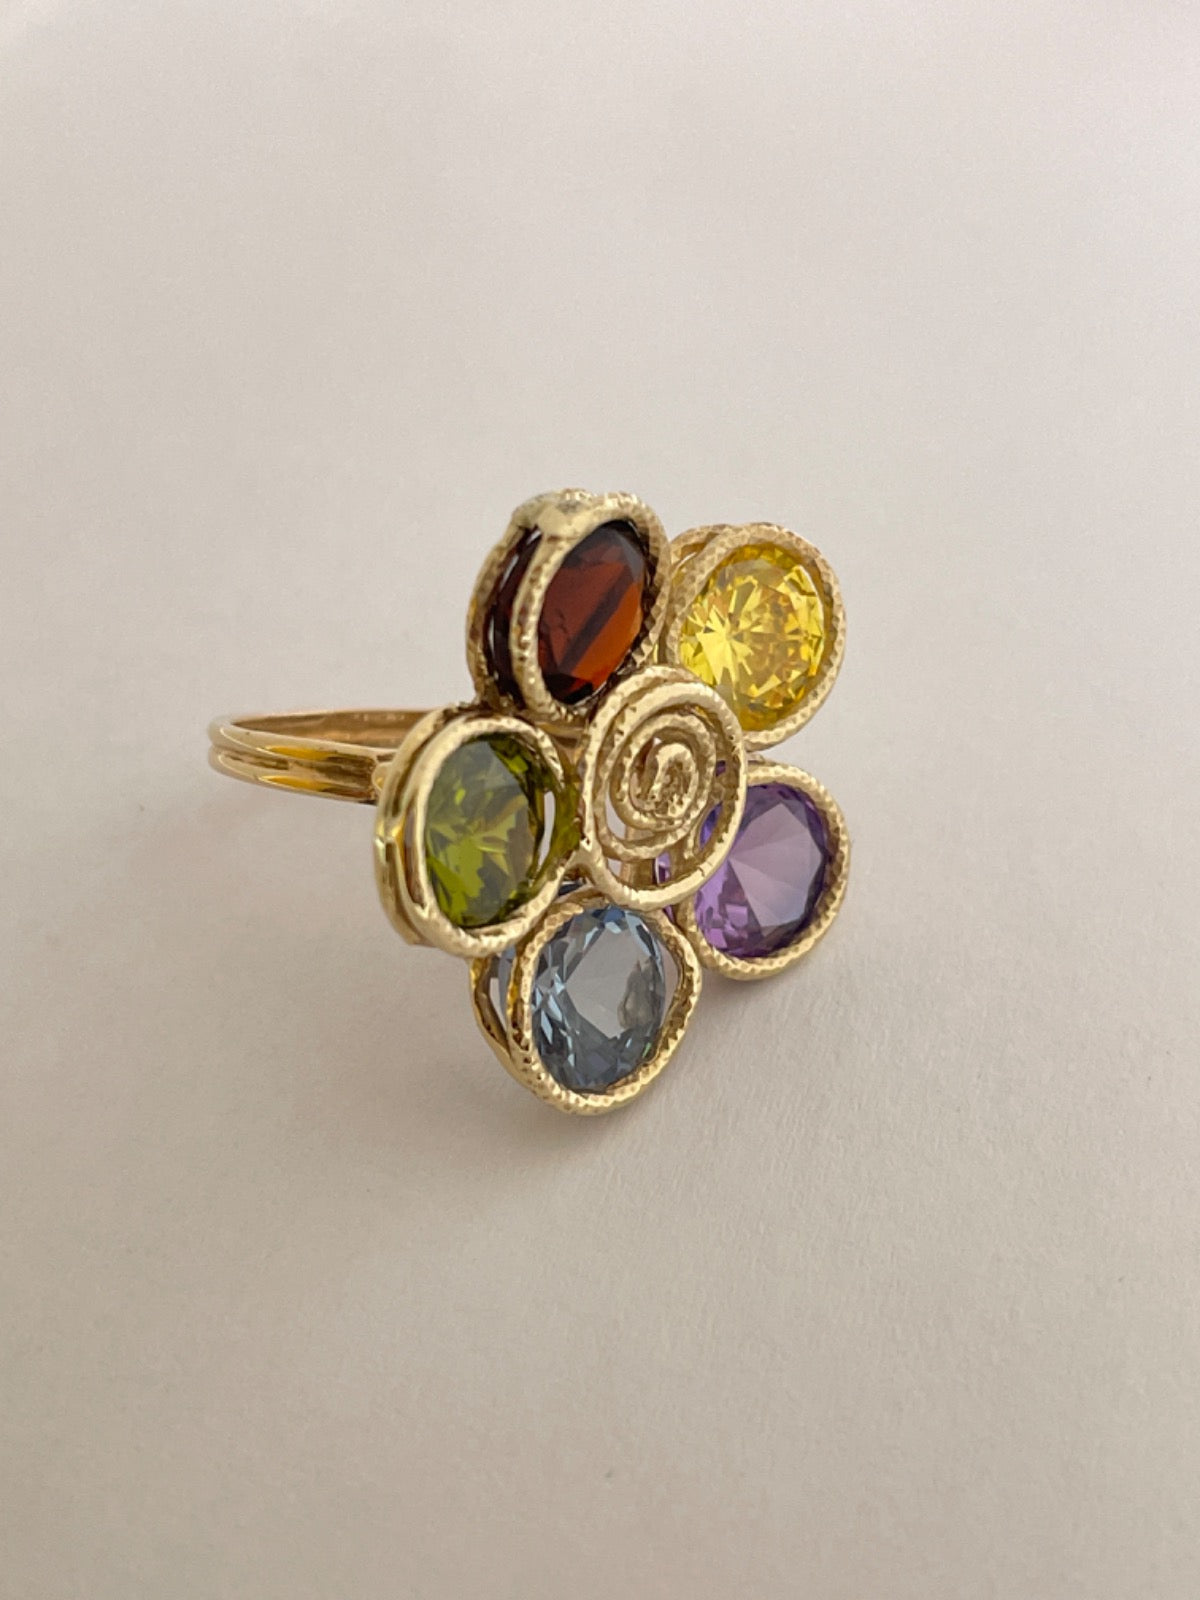 14K Yellow Gold Stone Flower  Ring with Amethyst, Garnet, Citrine and Green Amethyst